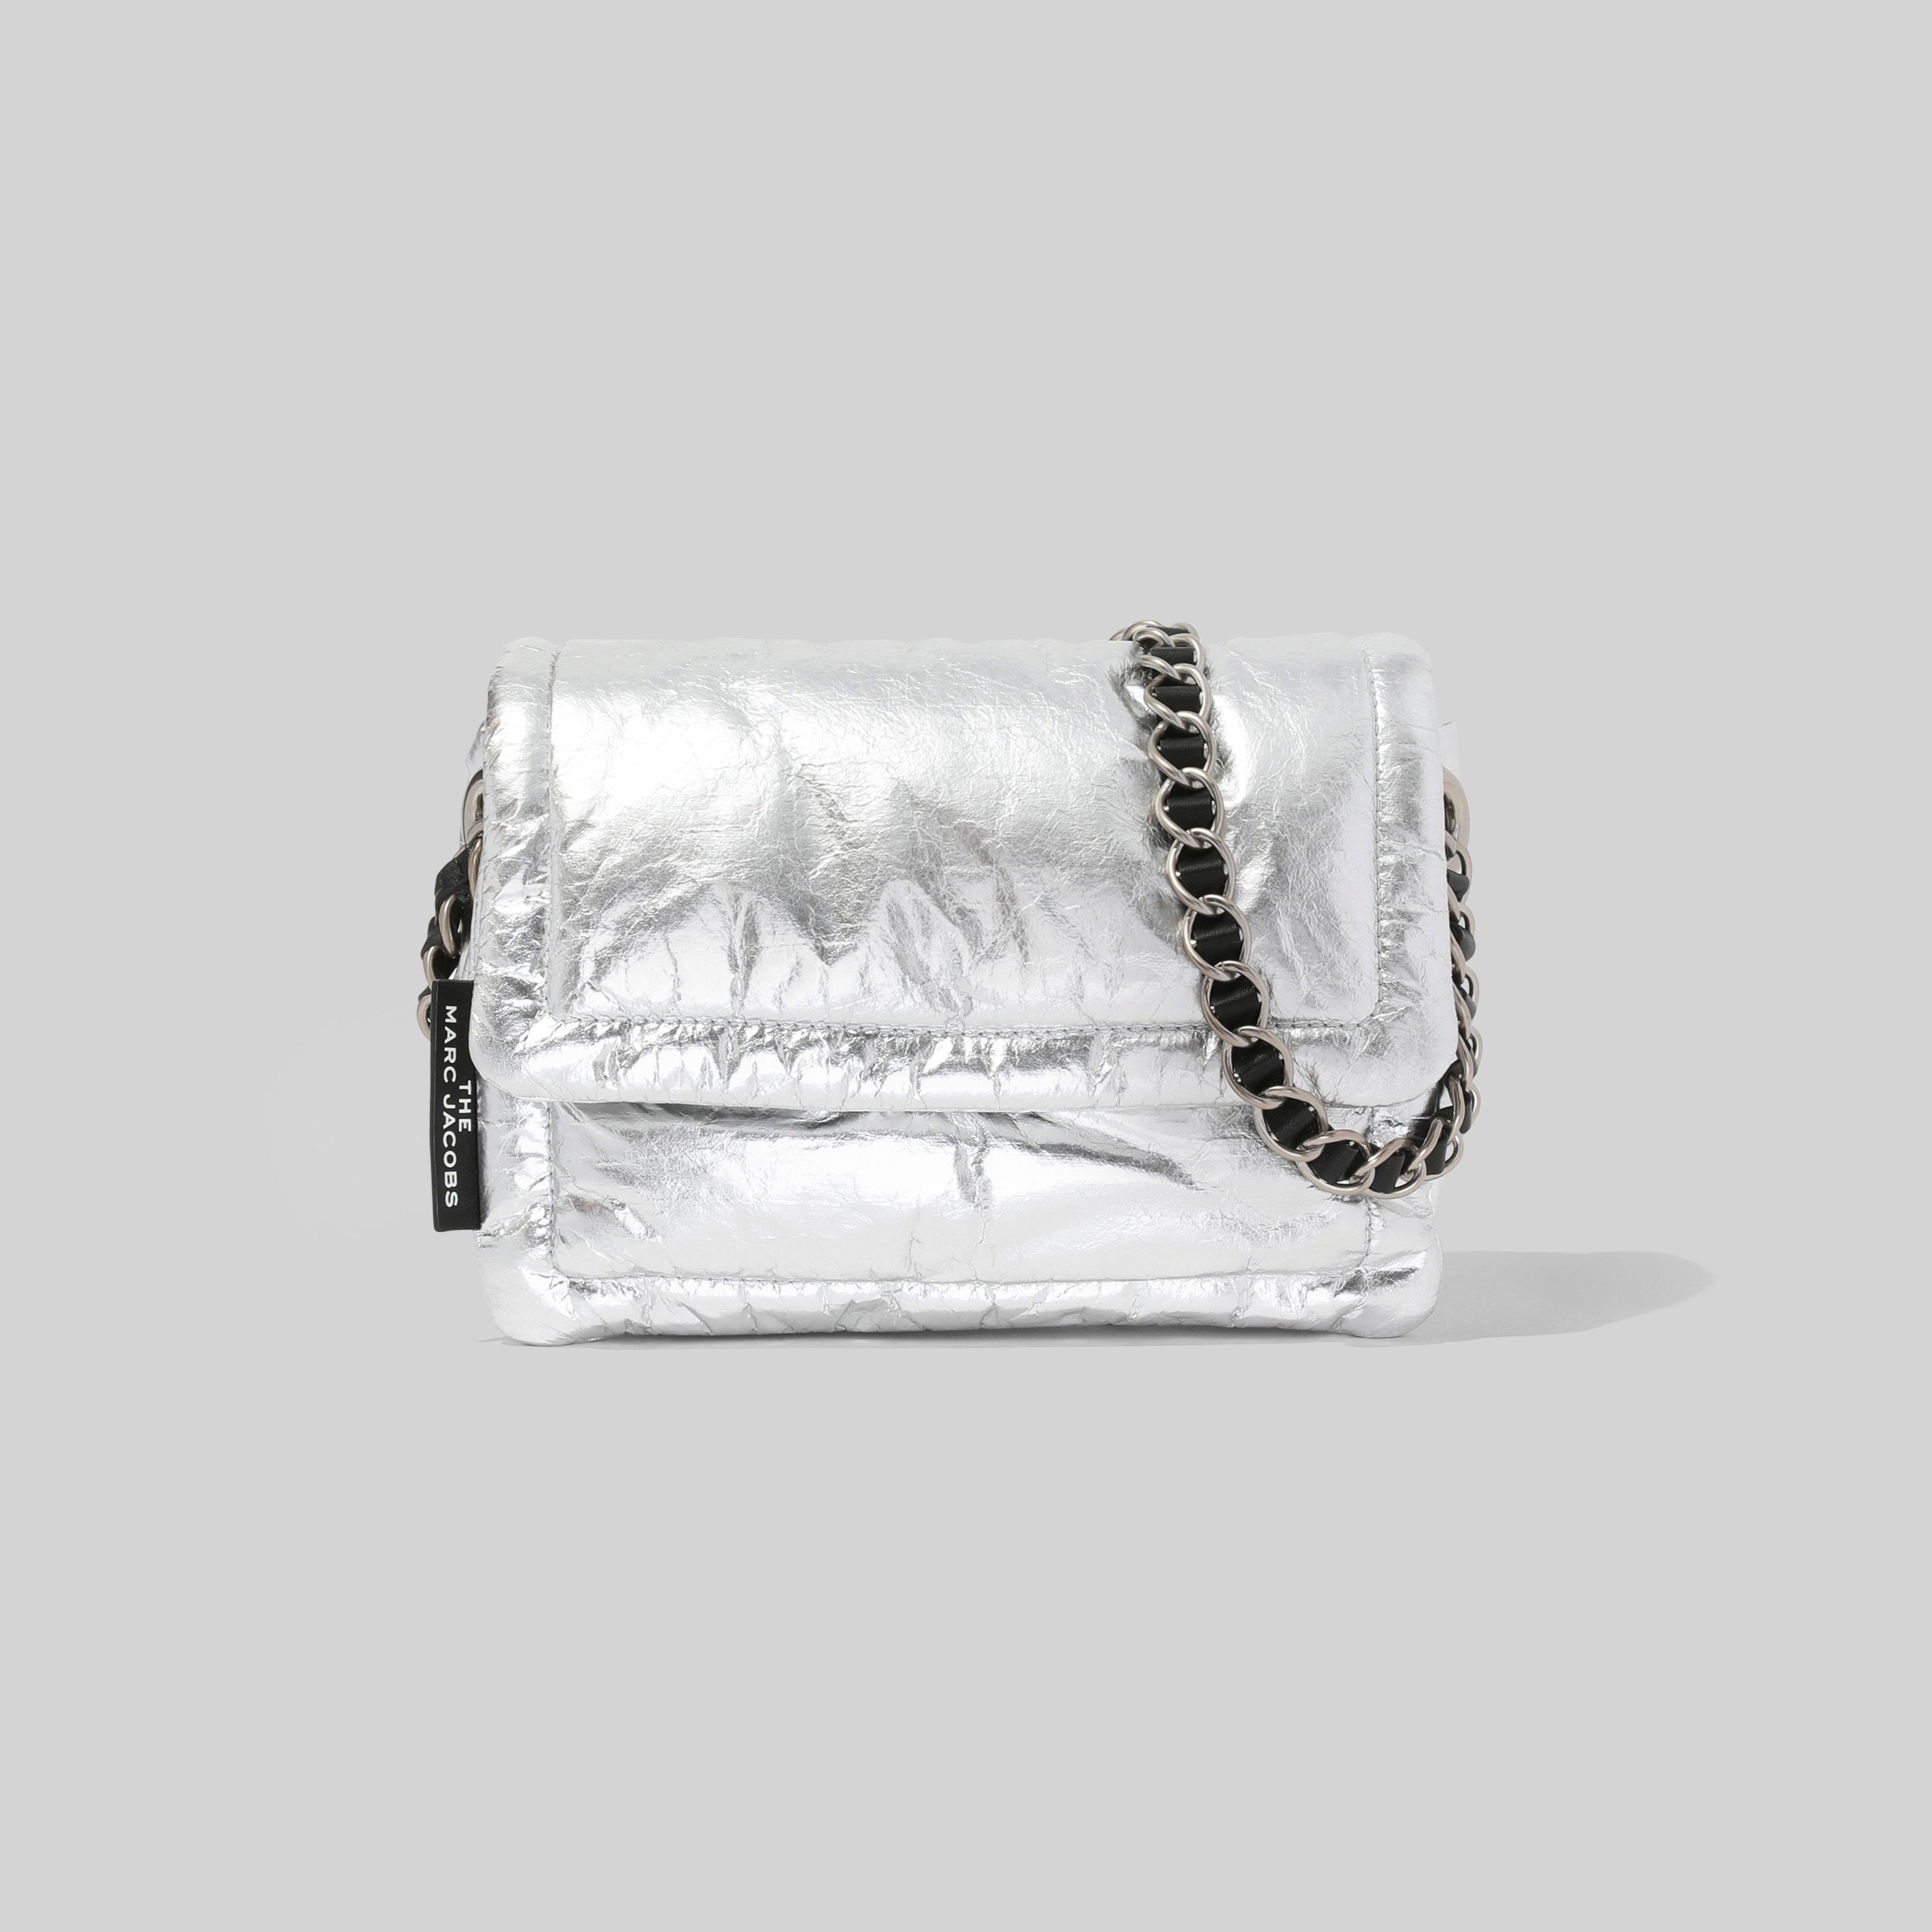 Marc Jacobs Leather The Pillow Bag in Silver (Metallic) - Save 40% - Lyst